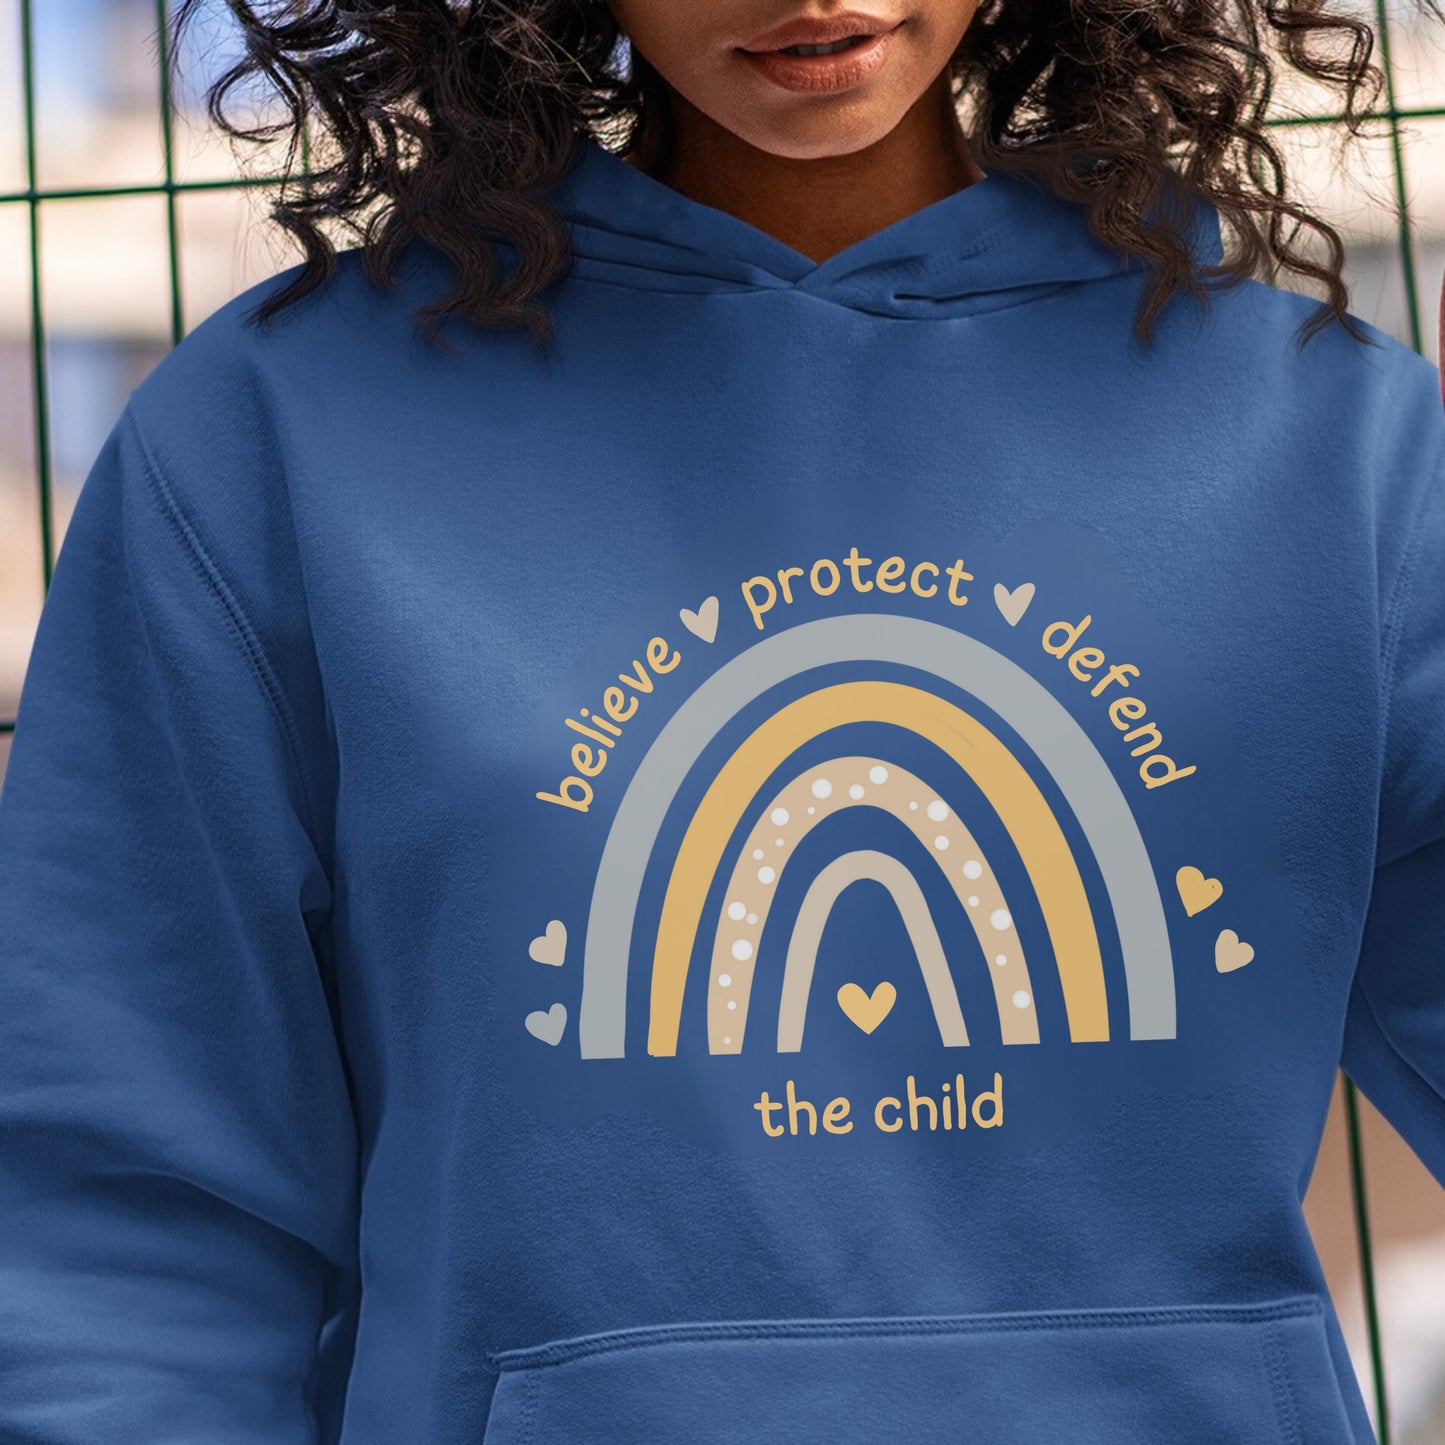  The front of the sweatshirt proudly displays a boho rainbow with the phrase "Believe Protect Defend The Child” in a whimsical and eye-catching font. A powerful message that underscores the importance of safeguarding children's rights and well-being.